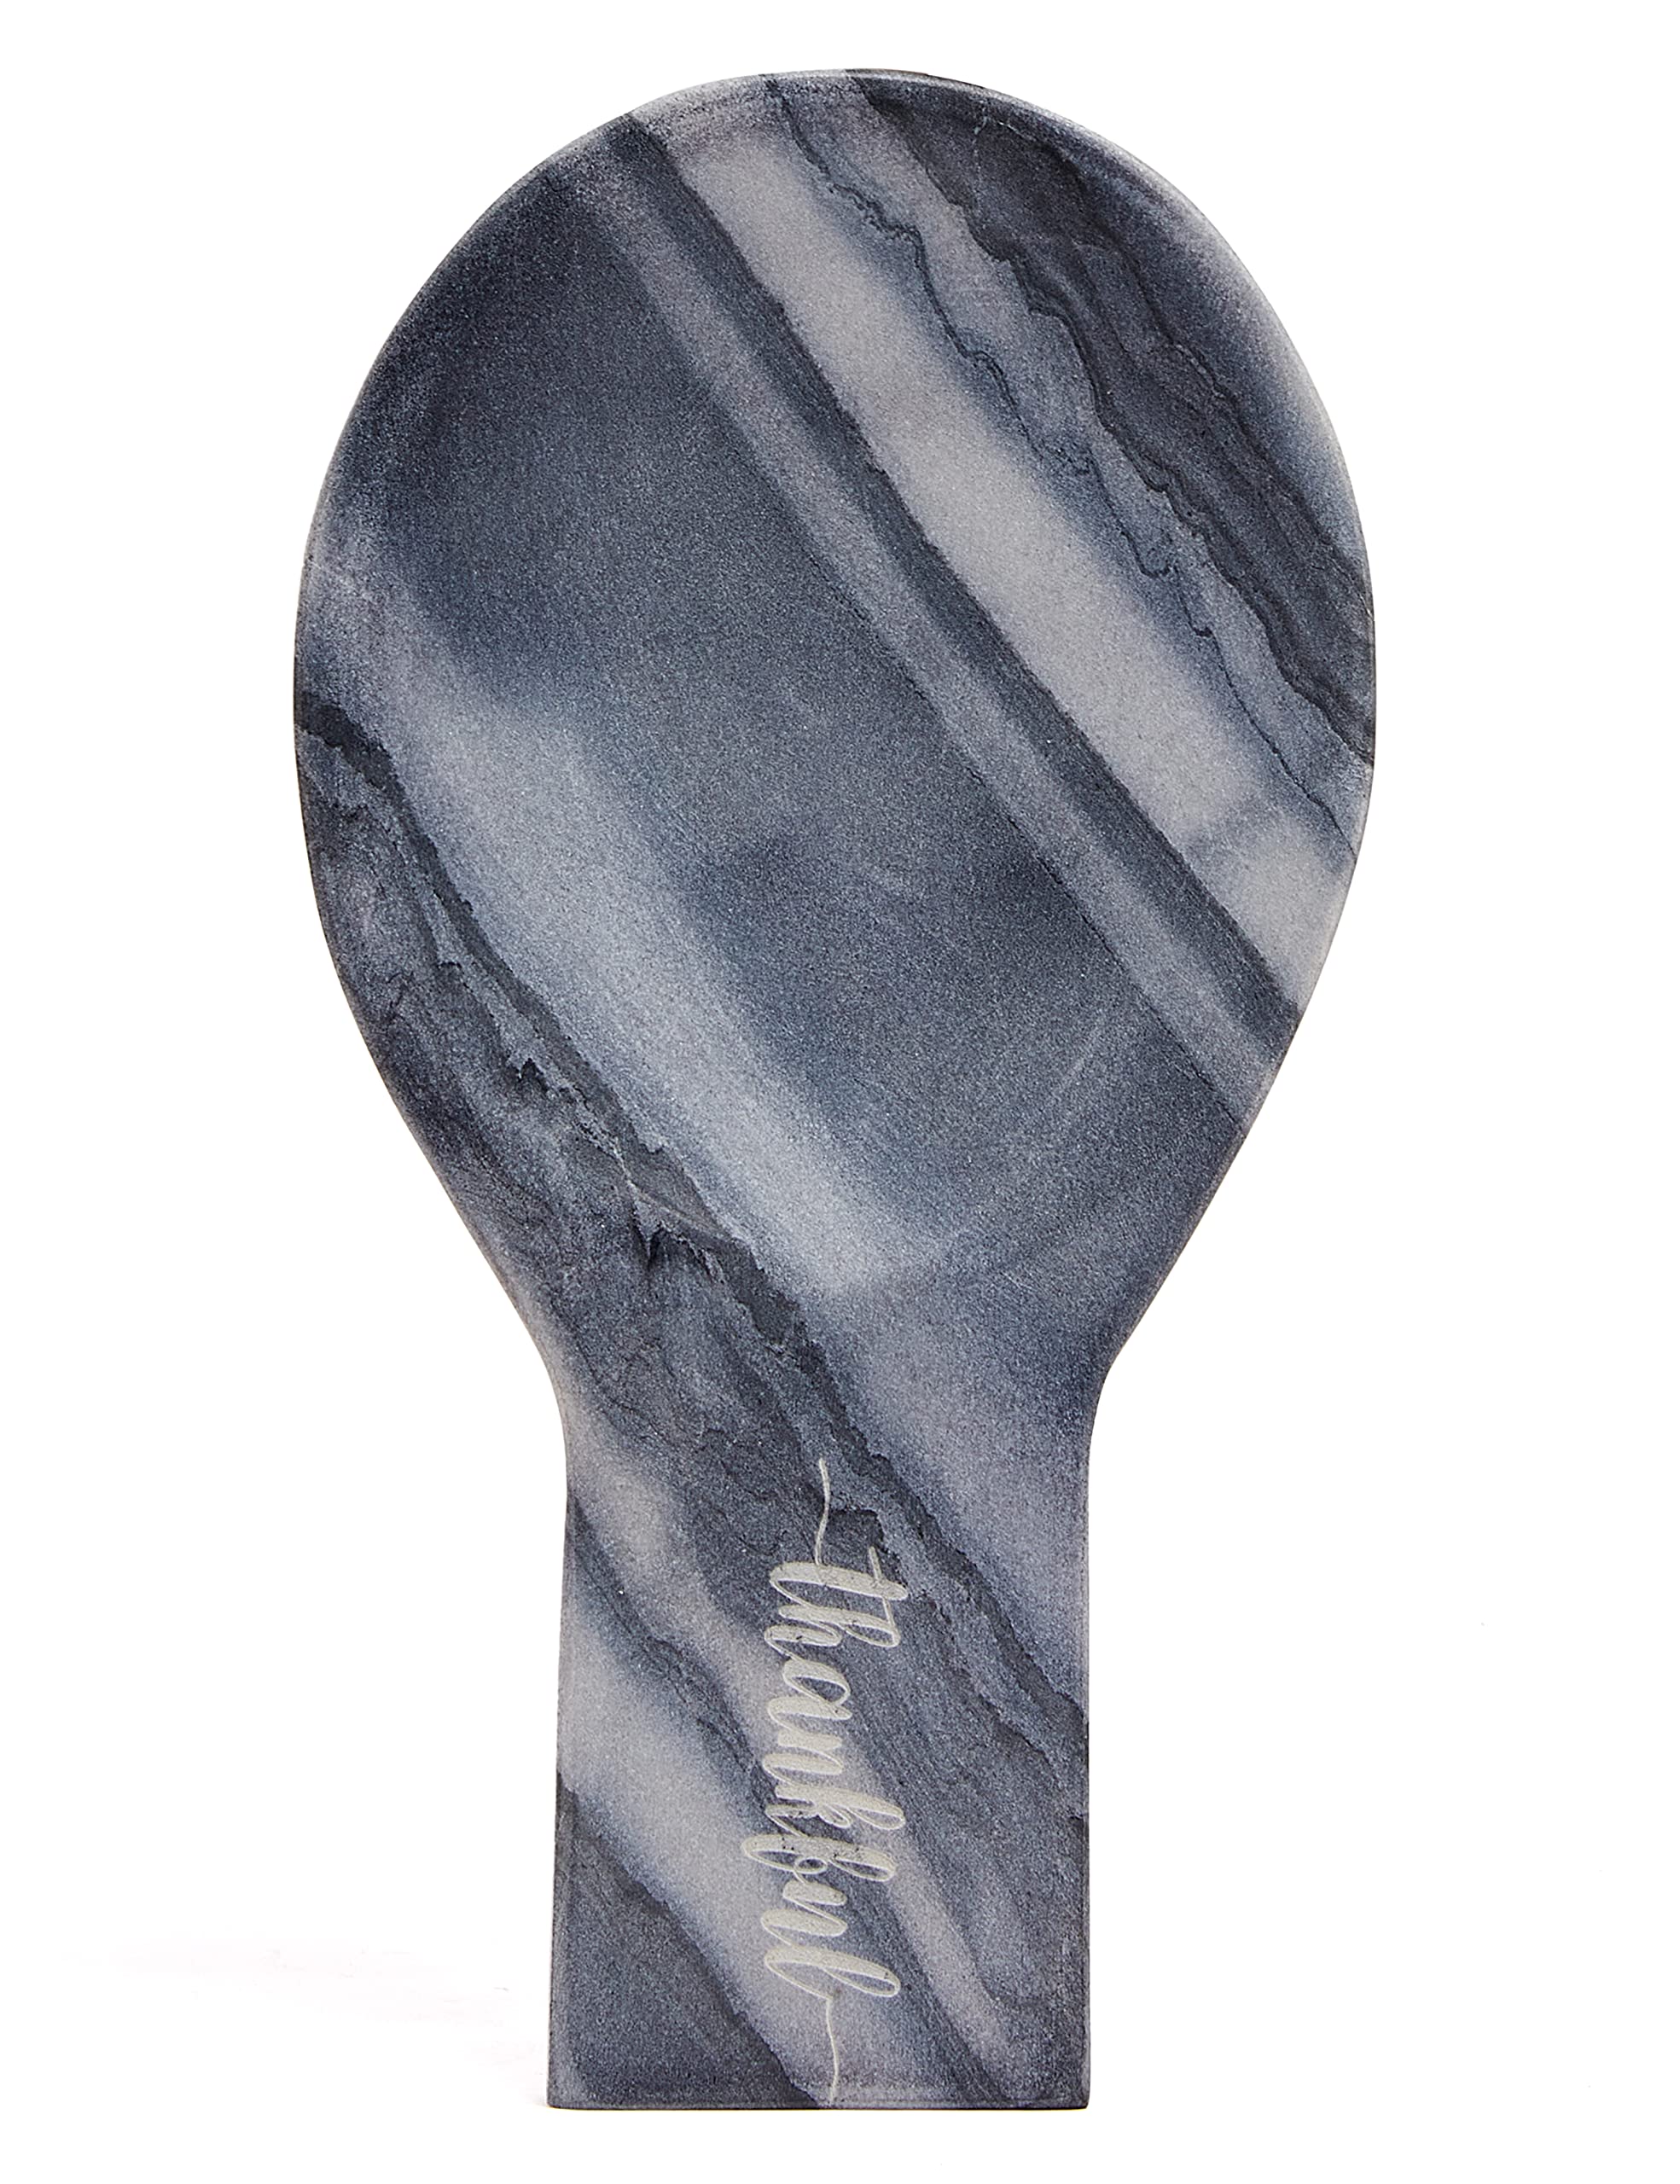 Lexi Home Marble Thankful Engraved 10" Spoon Rest